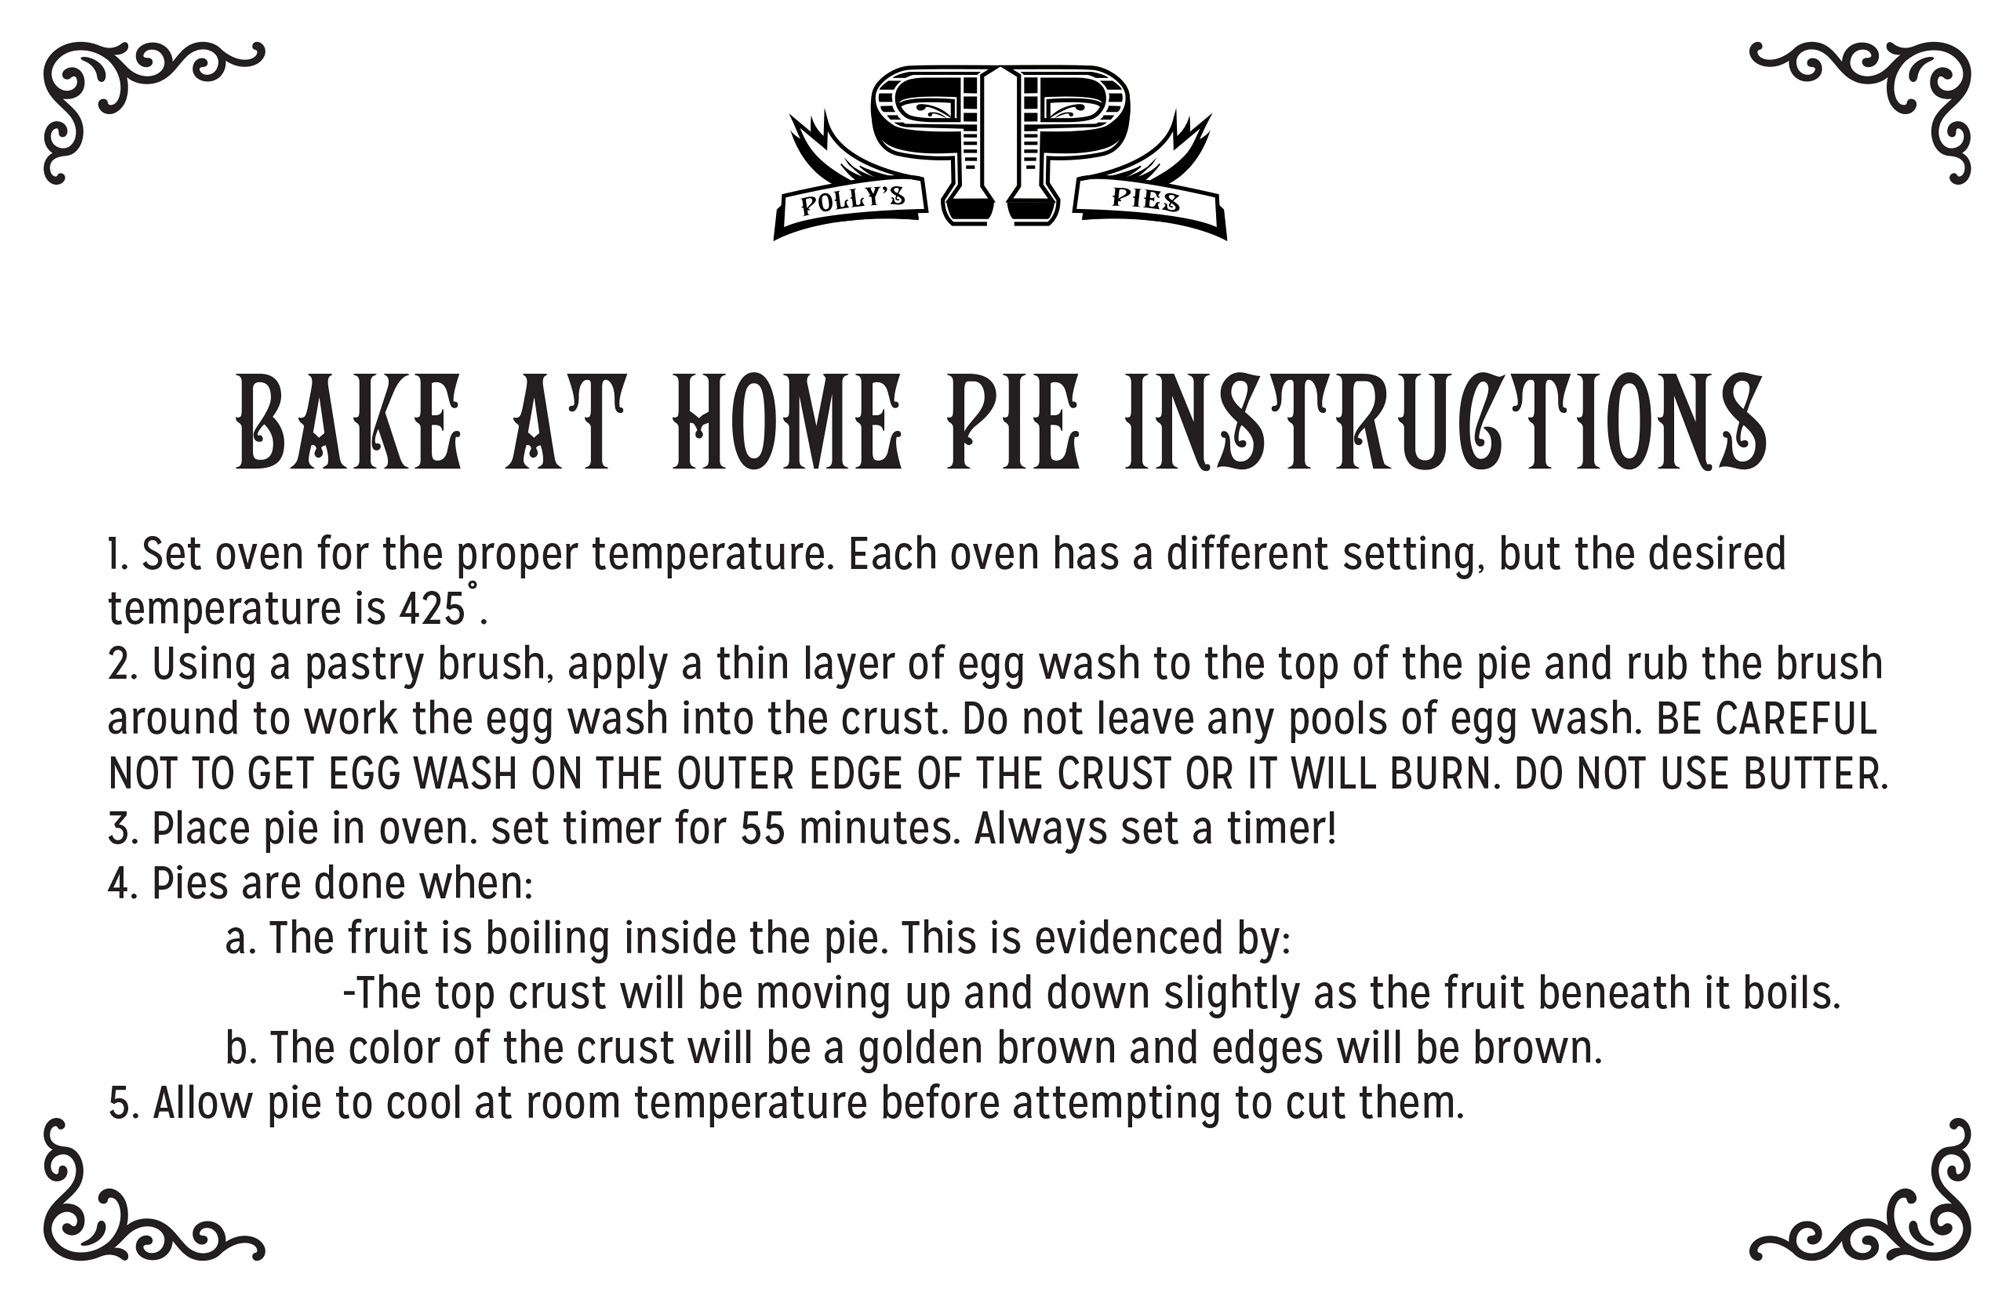 Quiche warming instructions 1